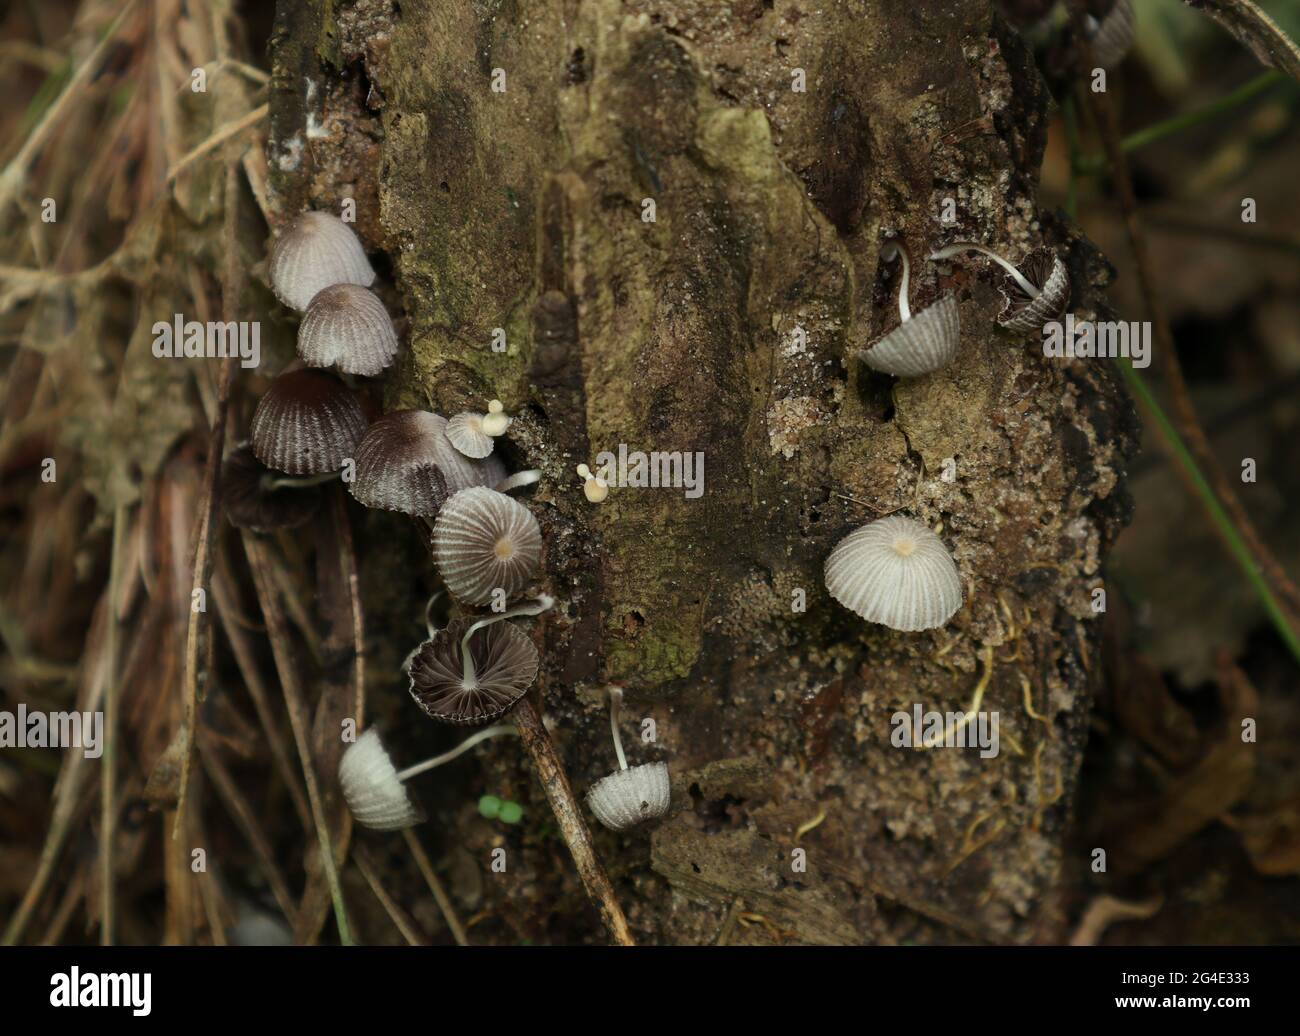 Close up of several tiny hood mushrooms on a dead plant stem that is turning to soil Stock Photo